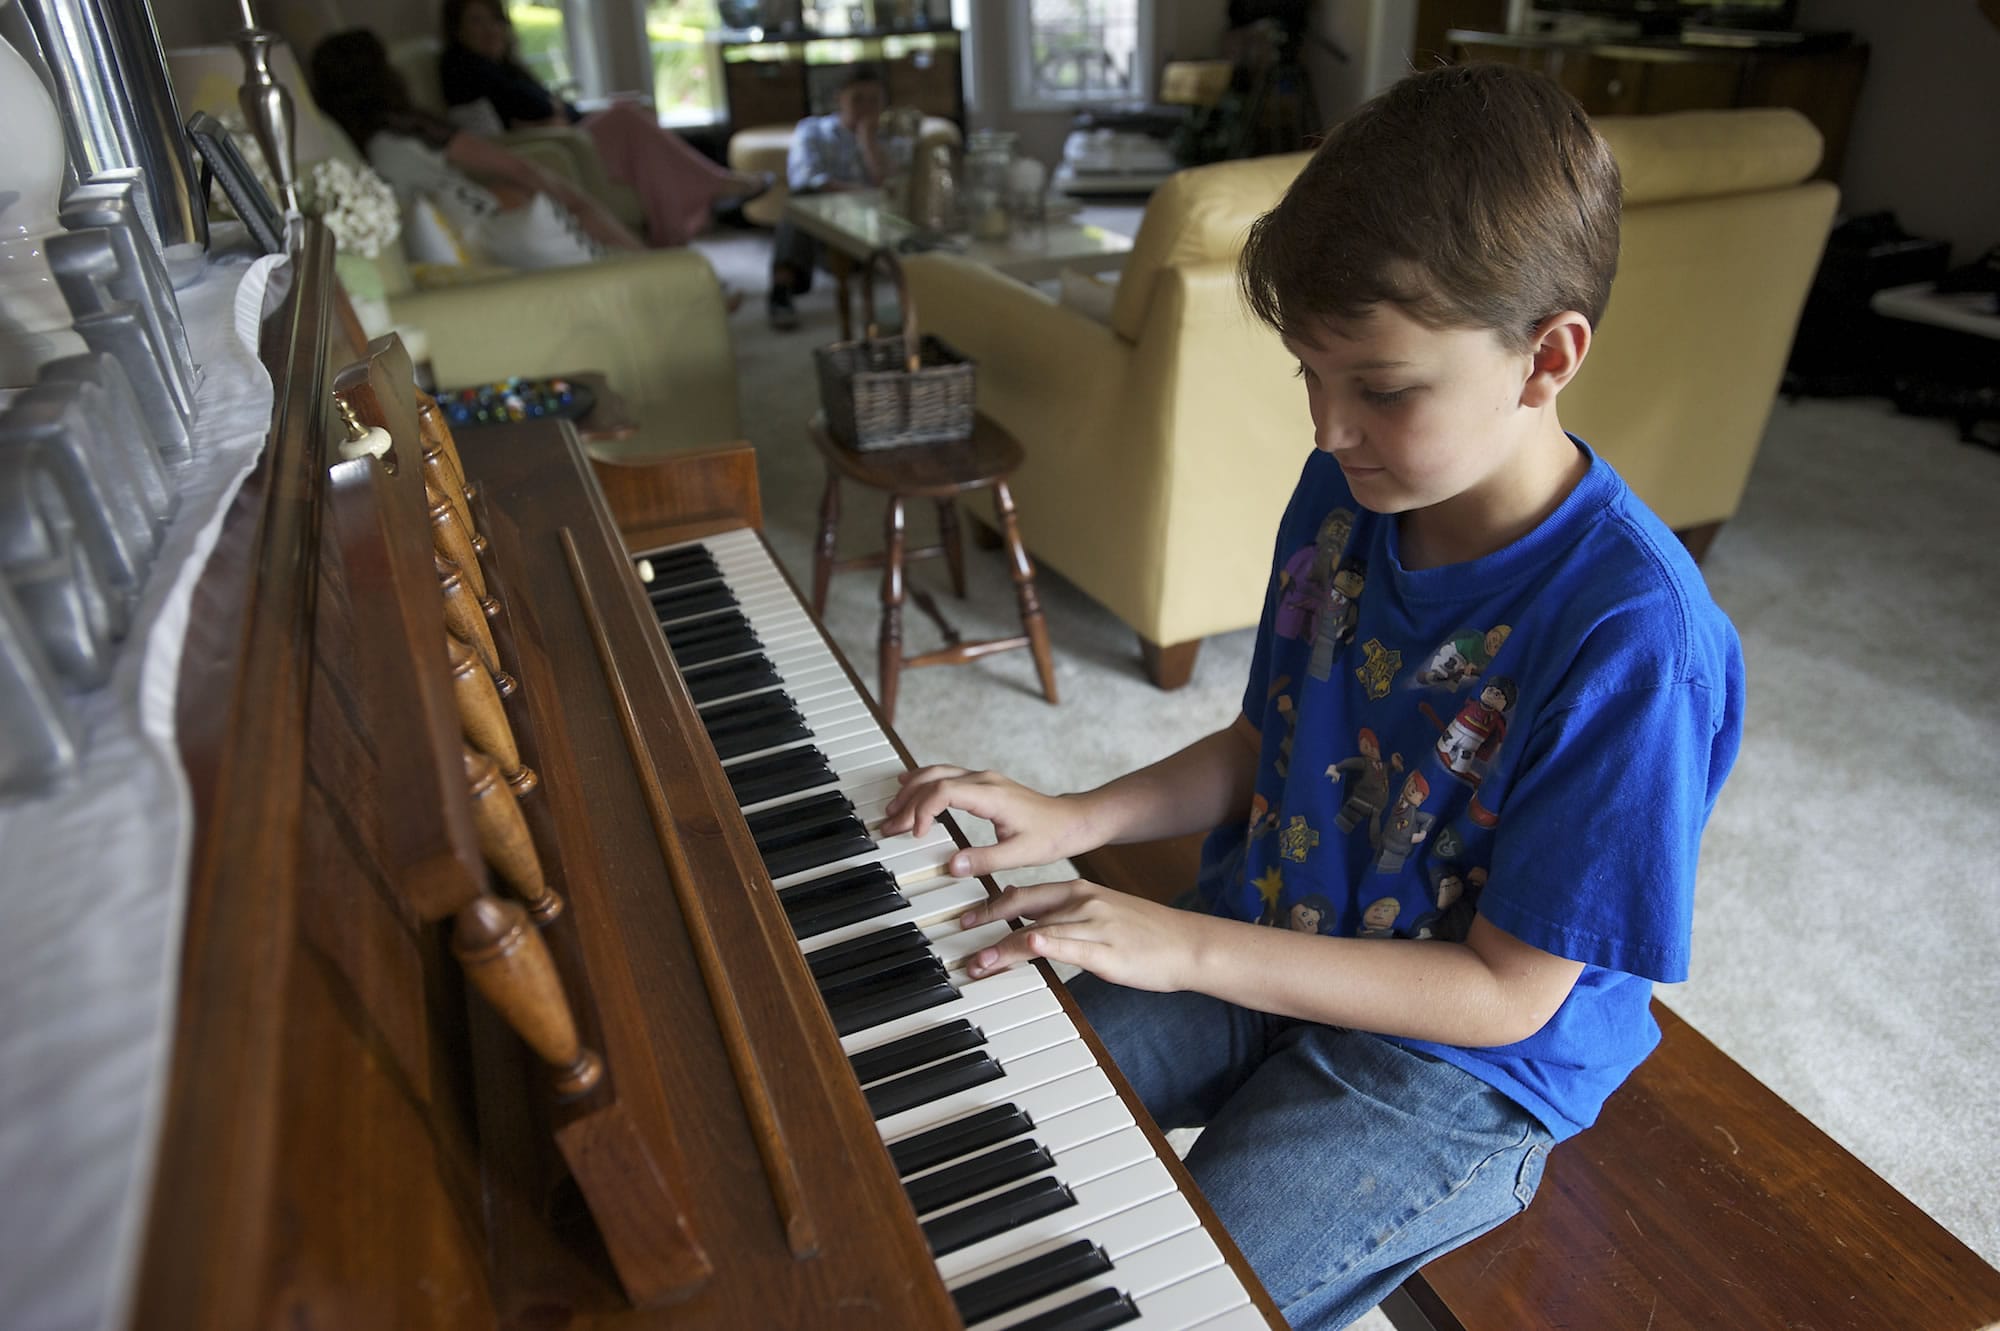 Cole Hancock, 10, still has trouble saying and remembering some words, but he remembers the piano pieces that he's learned.